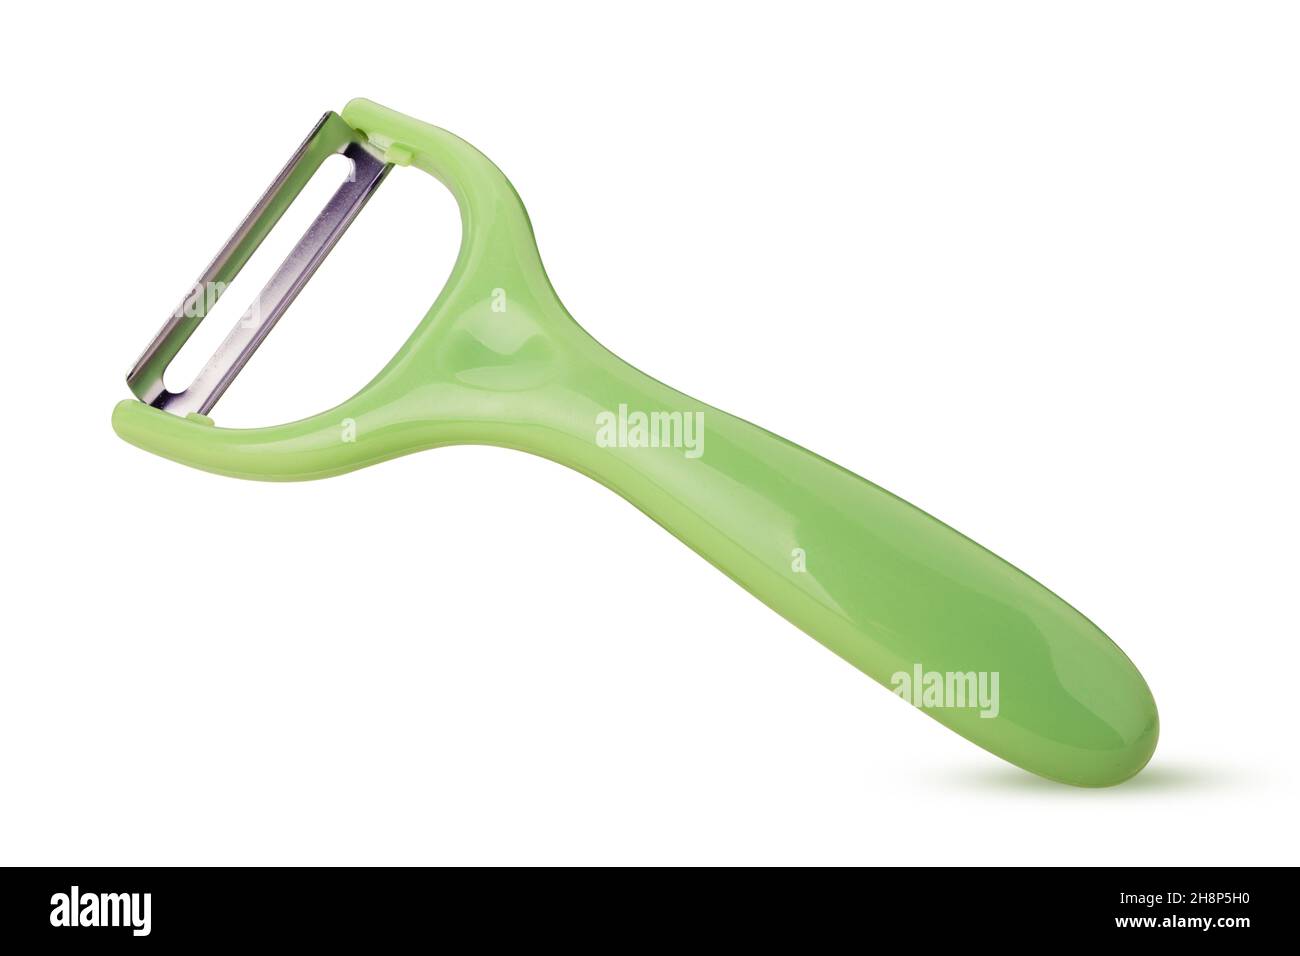 https://c8.alamy.com/comp/2H8P5H0/green-vegetable-peelers-close-up-isolated-on-white-background-clipping-path-full-depth-of-field-2H8P5H0.jpg